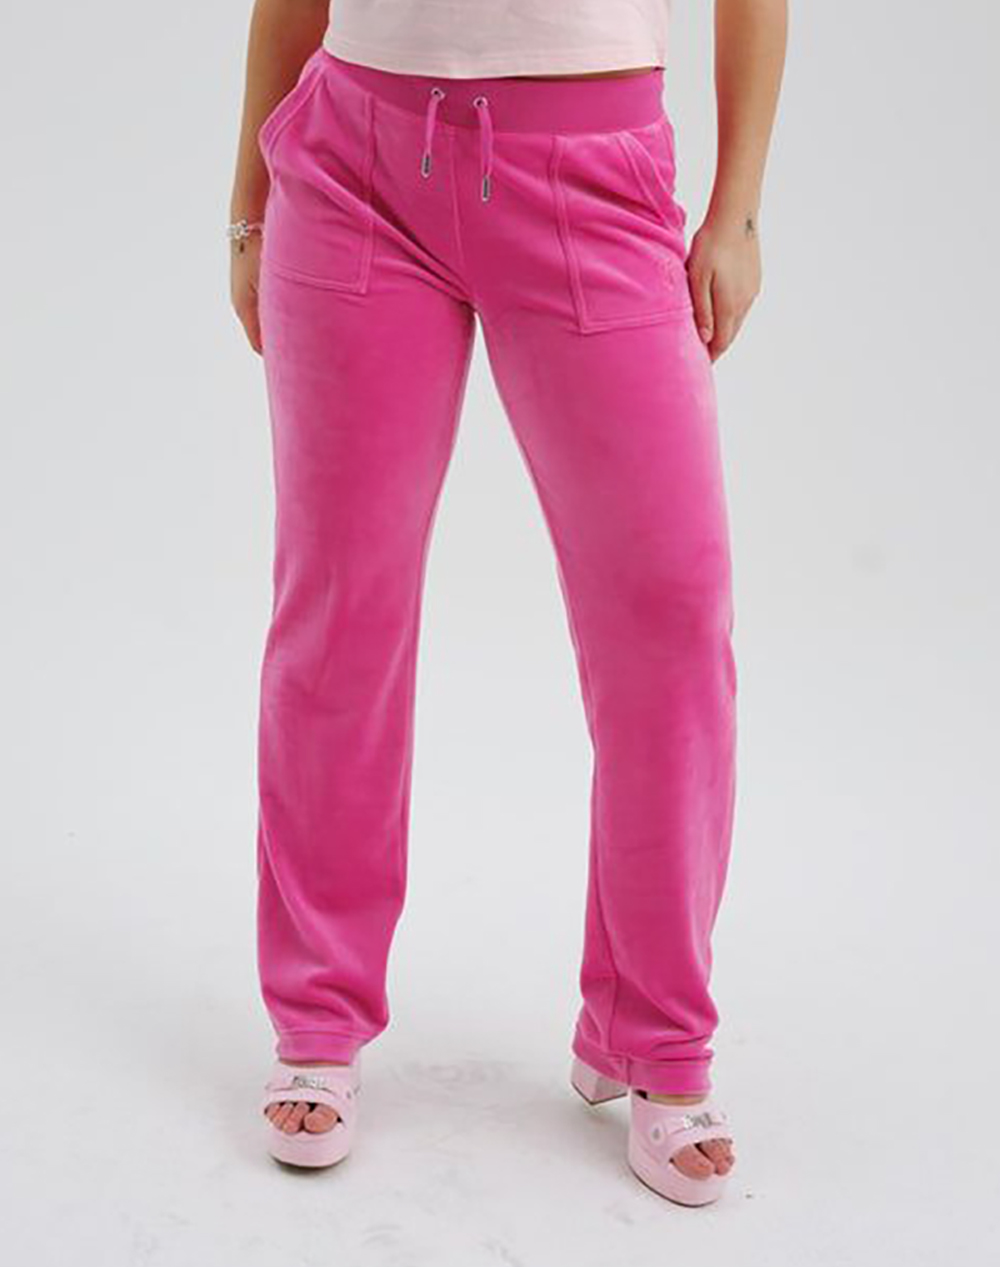 JUICY COUTURE DEL RAY - Classic